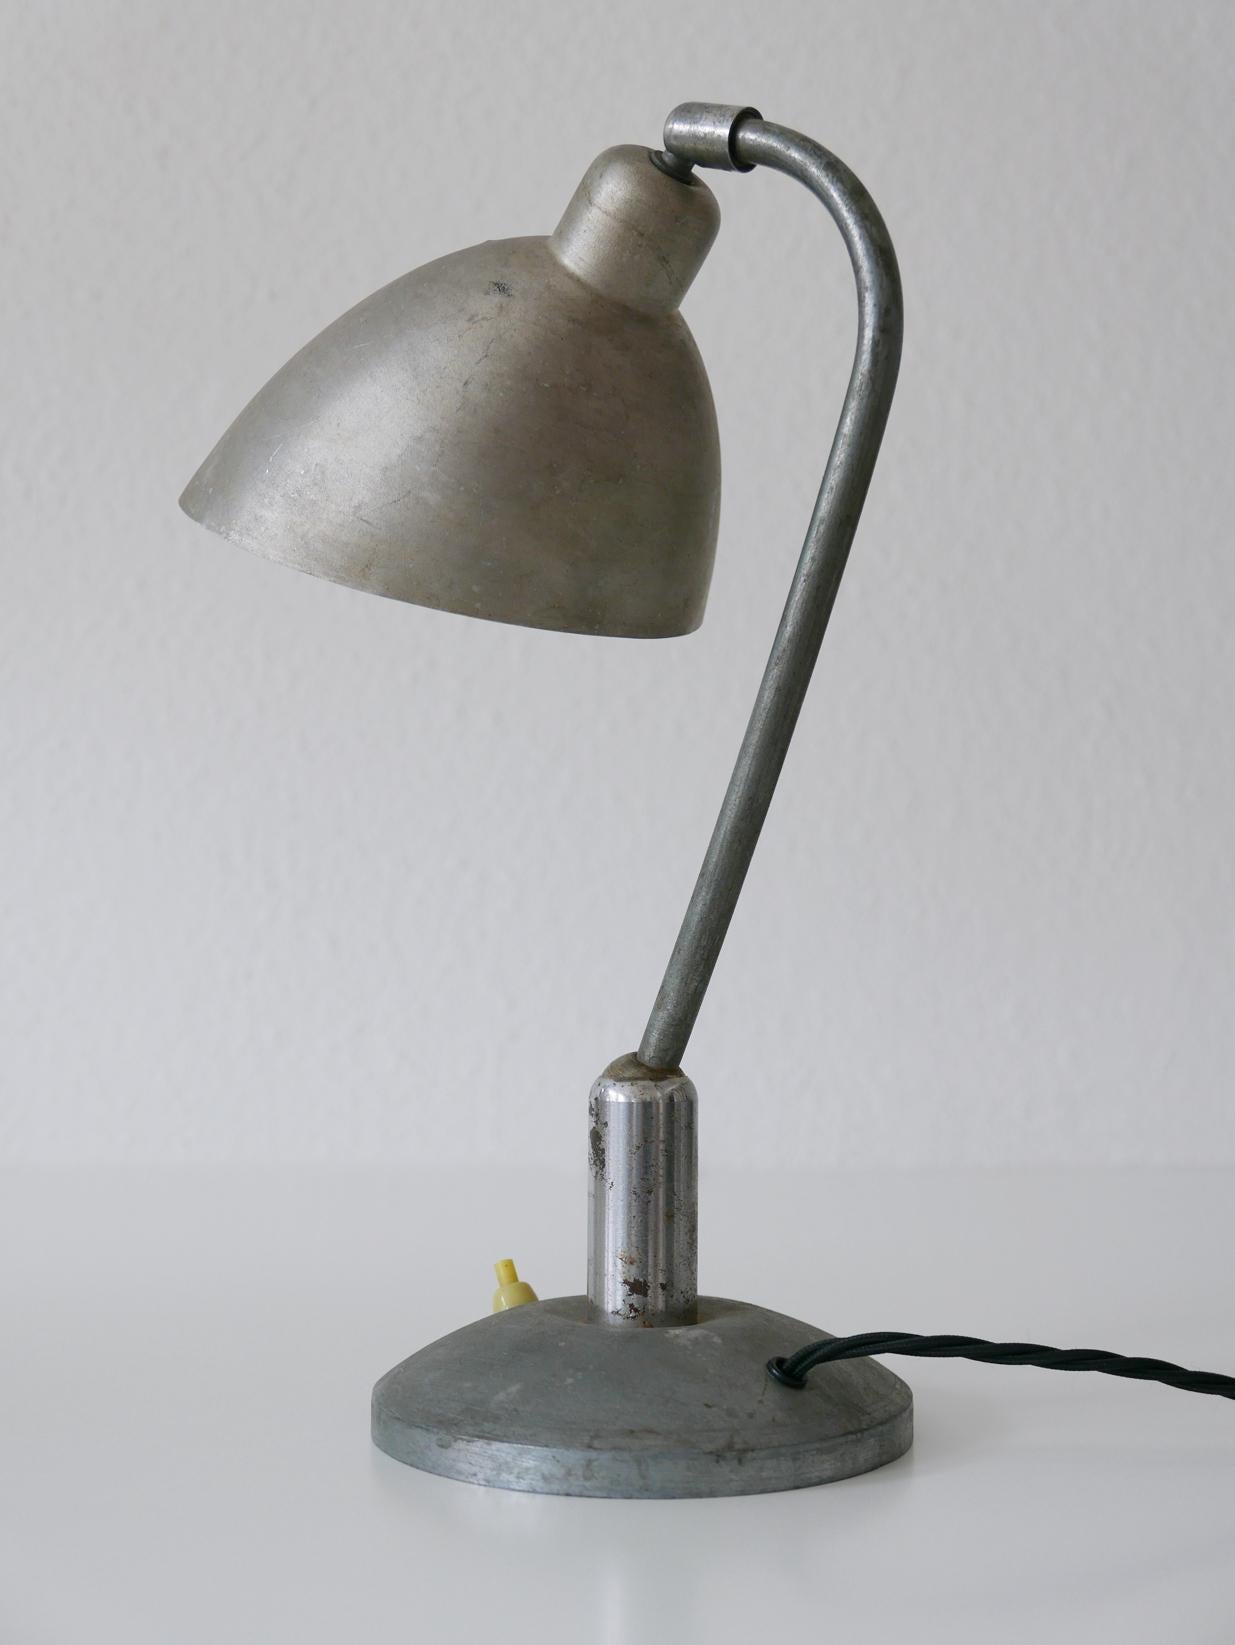 Rare Czech Functionalist or Bauhaus Table Lamp by Franta ‘Frantisek’ Anyz, 1920s For Sale 9